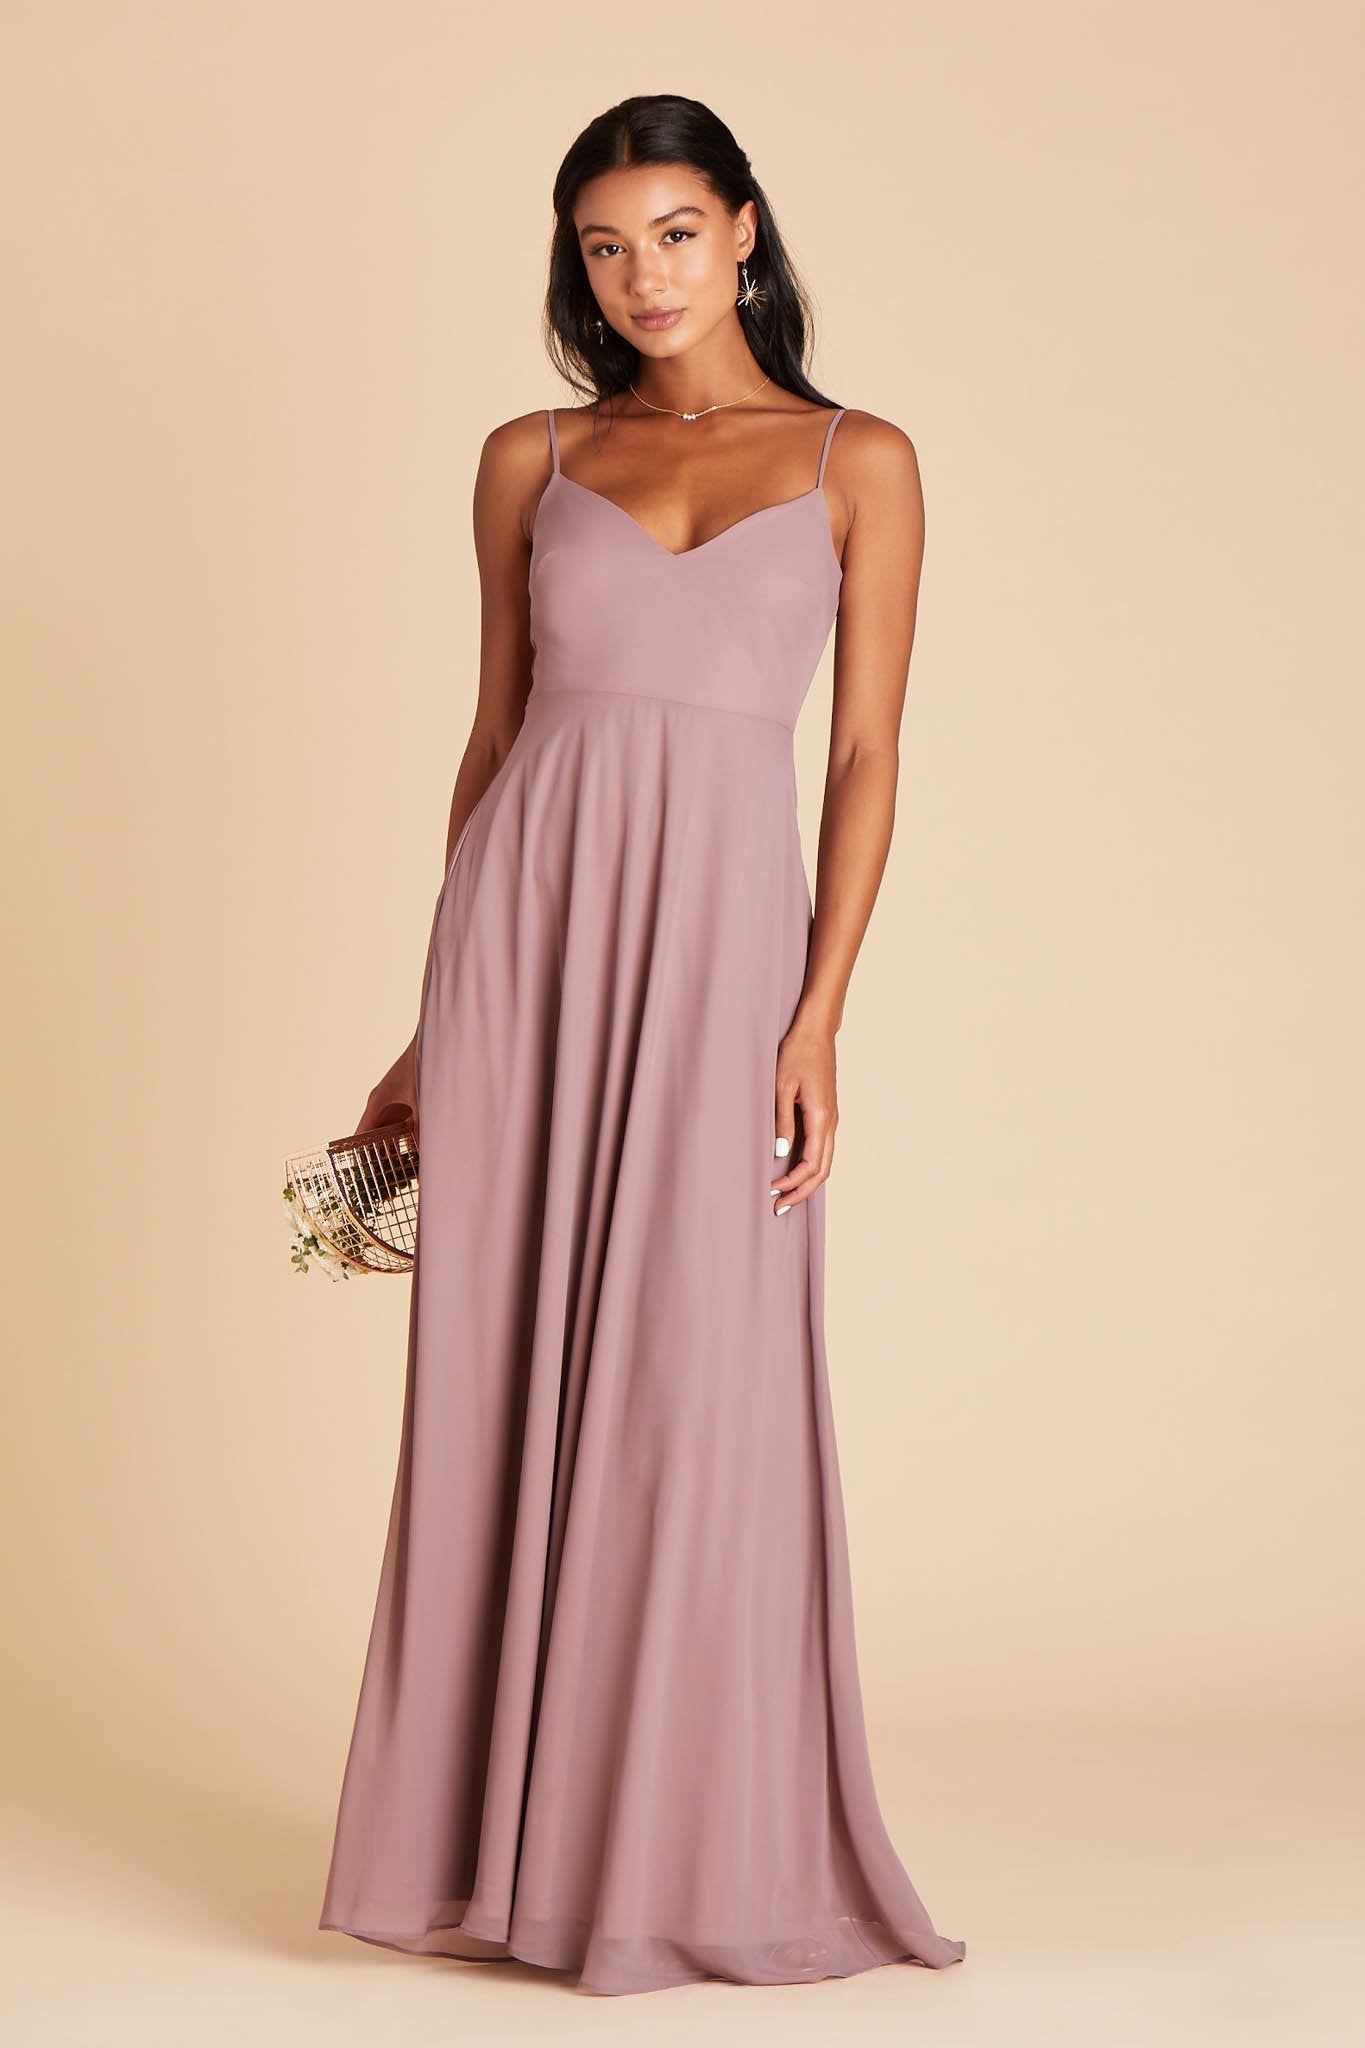 Devin convertible bridesmaid dress in dark mauve chiffon by Birdy Grey, front view